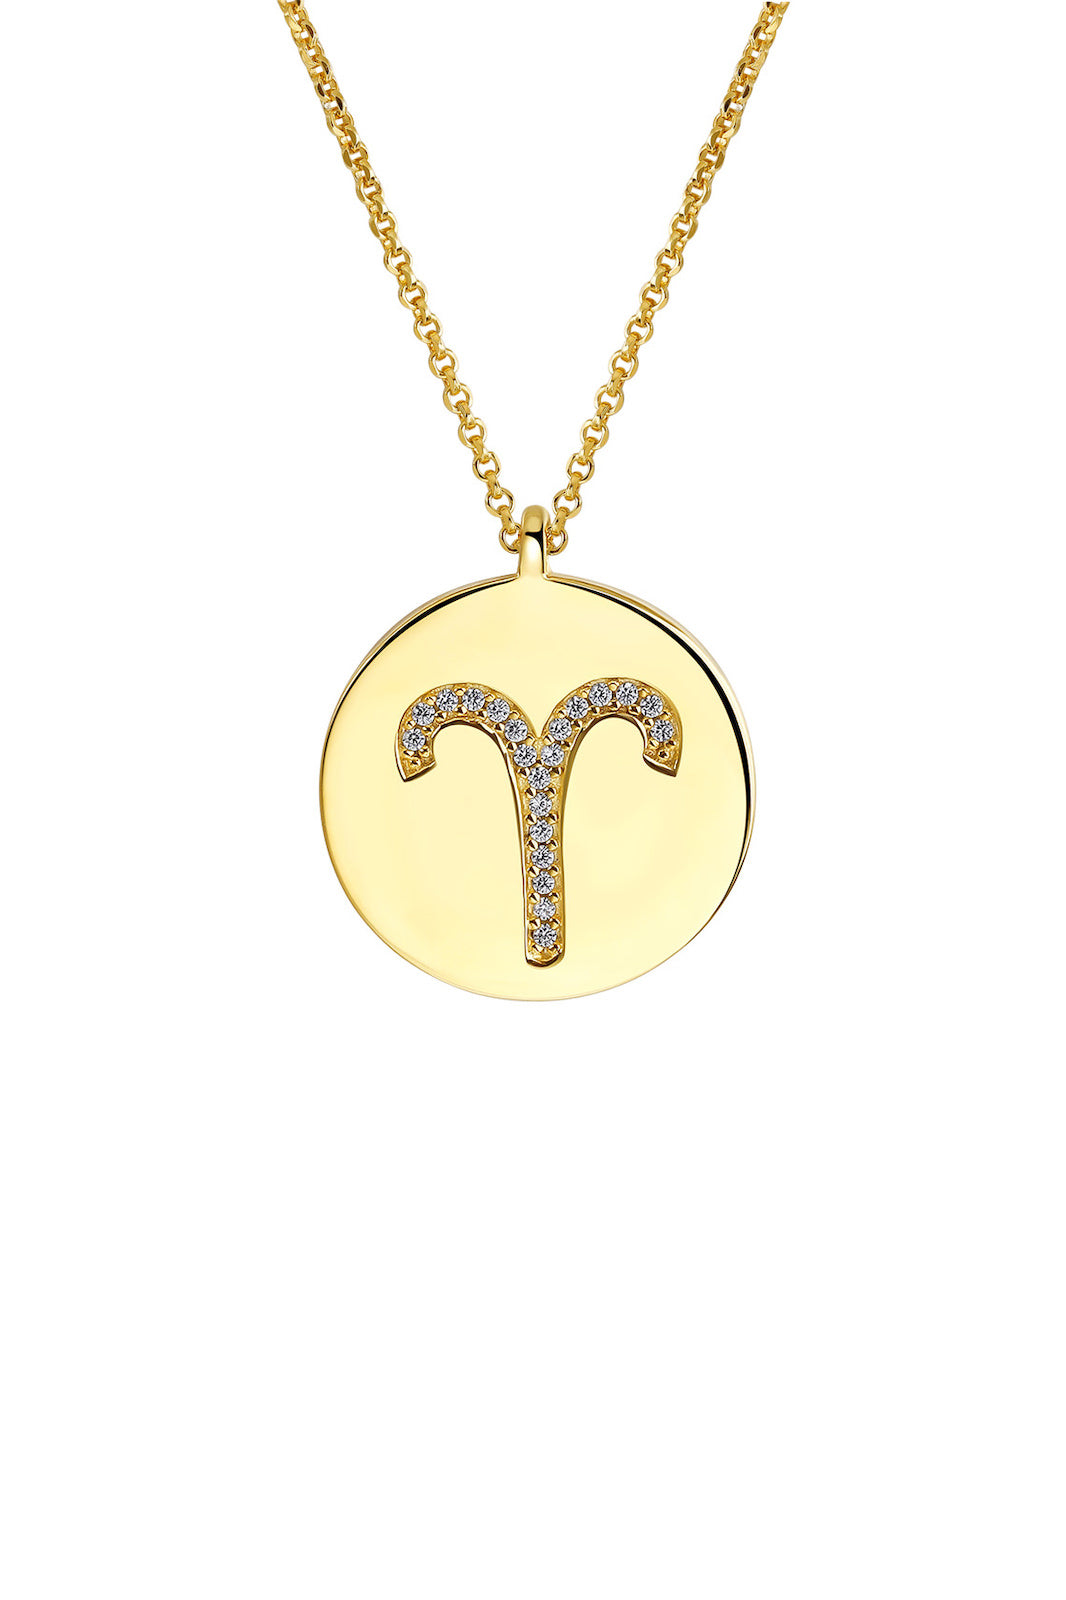 Gold Plated Silver Zodiac Necklace - Aries Side View